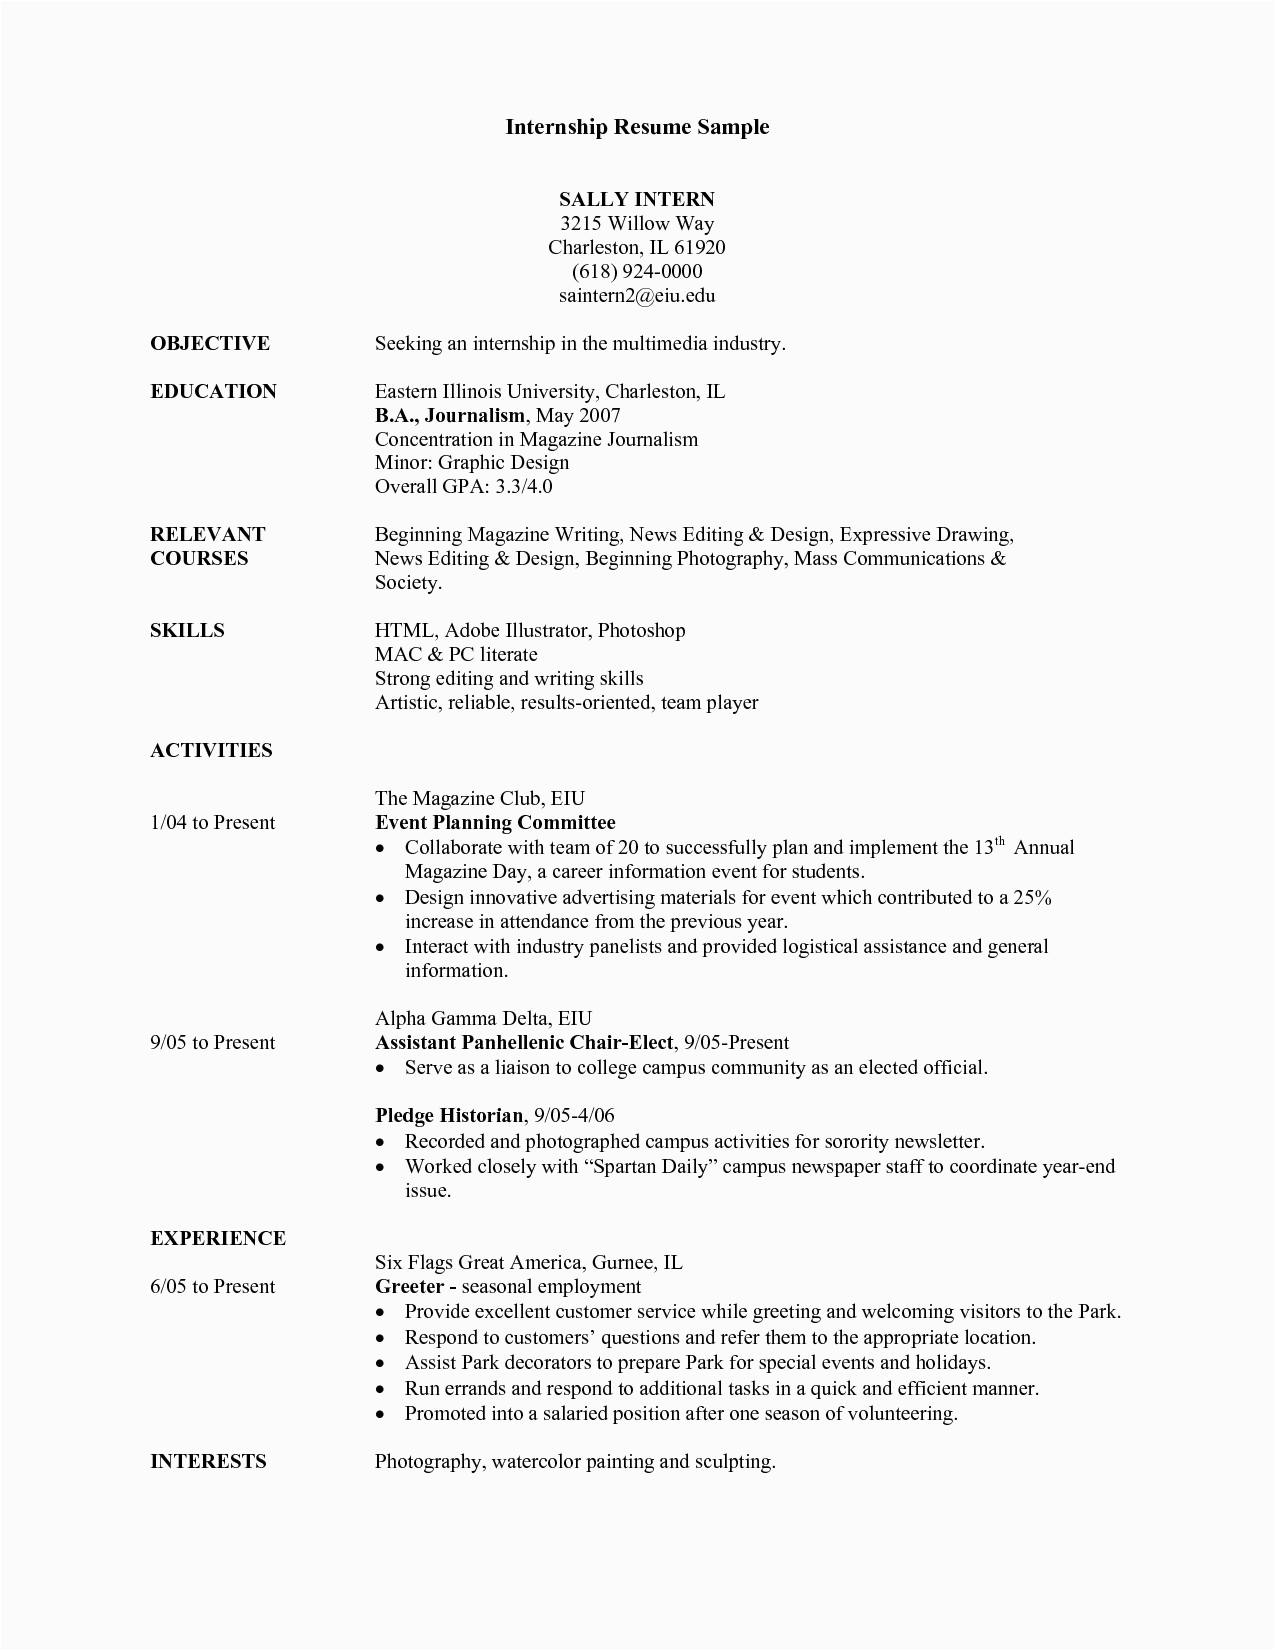 Sample Of Resume for College Internship Student Resume Example Sample College Internship Samples Students